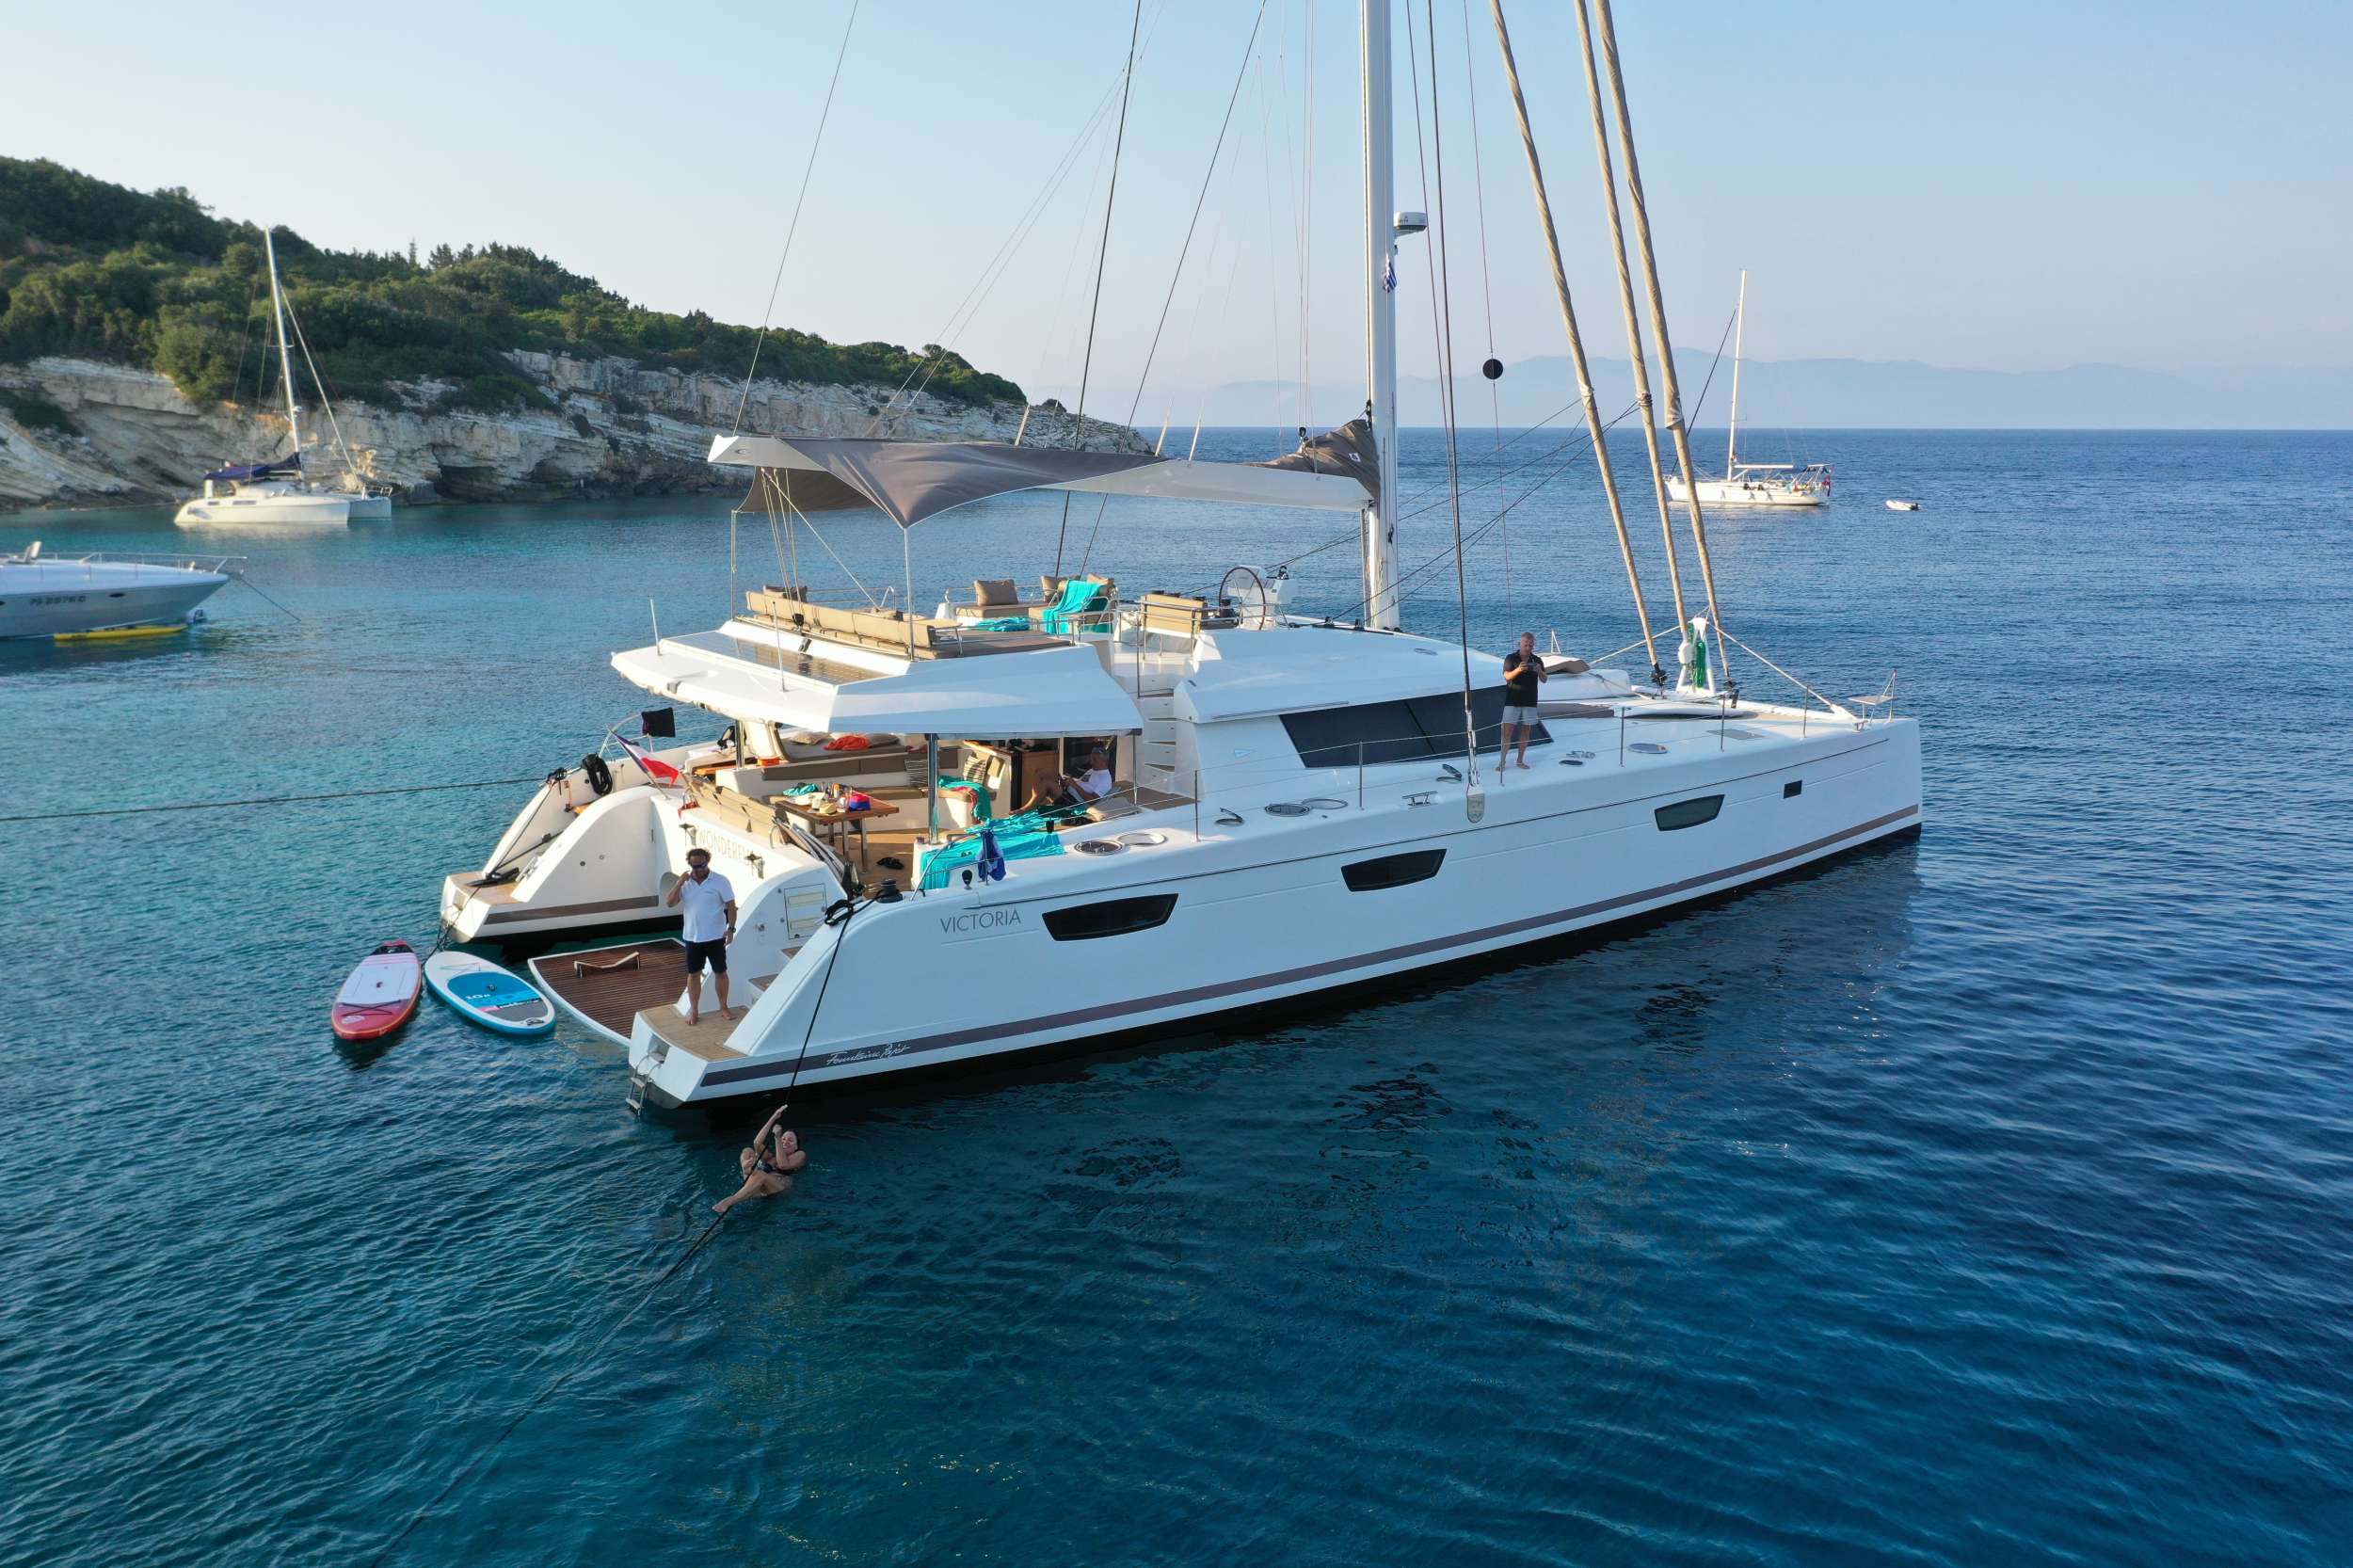 Some Kind of Wonderful is an exceptionally stunning custom-built Fountaine Pajot. Newly built and launched in 2016, she is a remarkable Flagship and top-of-the-line luxury catamaran designed for the most astute traveler. With her custom carbon fiber mast and boom, Kevlar standing rigging, extended hulls and keels she is lighter, faster, and stronger than the standard Victoria, ensuring guests reach their destinations quickly and smoothly whether under power or sail.

Some Kind of Wonderful is strikingly sleek, extraordinarily elegant, and exceedingly spacious with an overall length of 72 feet and beam of 31 feet. She is the epitome of cruising luxury. Previously privately owned and professionally crewed, Some Kind of Wonderful is new to the charter fleet in 2023.

The luxuriously appointed interior and notable design of Some Kind of Wonderful have been perfected for socializing with never-ending space both above and below deck. With a multitude of dining, living, sunbathing, and lounging areas to choose from, guests are presented with numerous options to create timeless memories in a spectacular retreat. The salon is open and airy with large windows that ensure beautiful 360-degree scenery. The salon features an inviting sofa for lounging or watching movies on the large cinema screen. The open galley has seemingly endless counterspace and is equipped with all new state-of-the-art appliances, fine porcelain tableware, and elegant glassware.

The exterior of Some Kind of Wonderful is most impressive! The highlight of the yacht is the exceptionally large flybridge with dual access points for safe and convenient movement onboard. There is ample space for the captain to maneuver at the helm, with nearby seating to allow guests who want to be a part of the sailing experience to stay close to the action. The flybridge boasts an oversized c-shaped sofa, 2 cocktail tables, 2 bench seats, 2 lounge/day beds, and versatile awning. The flybridge's 2 convenient refrigerators maintain deliciously cold beverages and cocktails to enhance the picturesque views, tranquil sunsets, and evening breezes. The substantial aft deck is shaded by the flybridge overhead and provides 2 additional bench seats, 2 lounge/daybeds, as well as an elegant setting for formal dining. The foredeck with 2 additional lounge/daybeds, 2 bow pulpit seats, and 2 trampolines is a wonderful place for lounging, spotting turtles or dolphins, and immersing in the incredible views while underway.

Some Kind of Wonderful accommodates 8 guests in 4 cabins: 1 king primary suite, 2 queen suites, and 2 twin beds that can be converted to a king upon request. Each cabin has a private ensuite bathroom with separate dry shower stalls, independent air-conditioning, complete with the finest quality bed linens, towel sets, and beach towels. The primary suite is vast and elegantly appointed, with additional seating/lounge area, a television, a desk/dressing table, king size bed, and the ensuite bathroom with separate oversized glass shower stall and double vanity. 

Some Kind of Wonderful is equipped with all new water toys including stand-up paddleboards, double kayak, 360 hangout, snorkel gear, knee board, tube, water skis, and more. The extended tender platform converts to a swim platform for easy access to water activities.

After an adventure-filled day of sailing, water sports, swimming, or on-shore excursions, appreciate the well-lit and immense cockpit dining area as you enjoy an extraordinary meal with your friends and family. Take pleasure in a handmade cocktail prepared just for you by your professional crew. You will appreciate firsthand the meaning of serenity, relaxation, and elegance when you charter with us on Some Kind of Wonderful. Your experienced Captain and accomplished Chef await your arrival in paradise to create unforgettable moments and memories to last a lifetime.